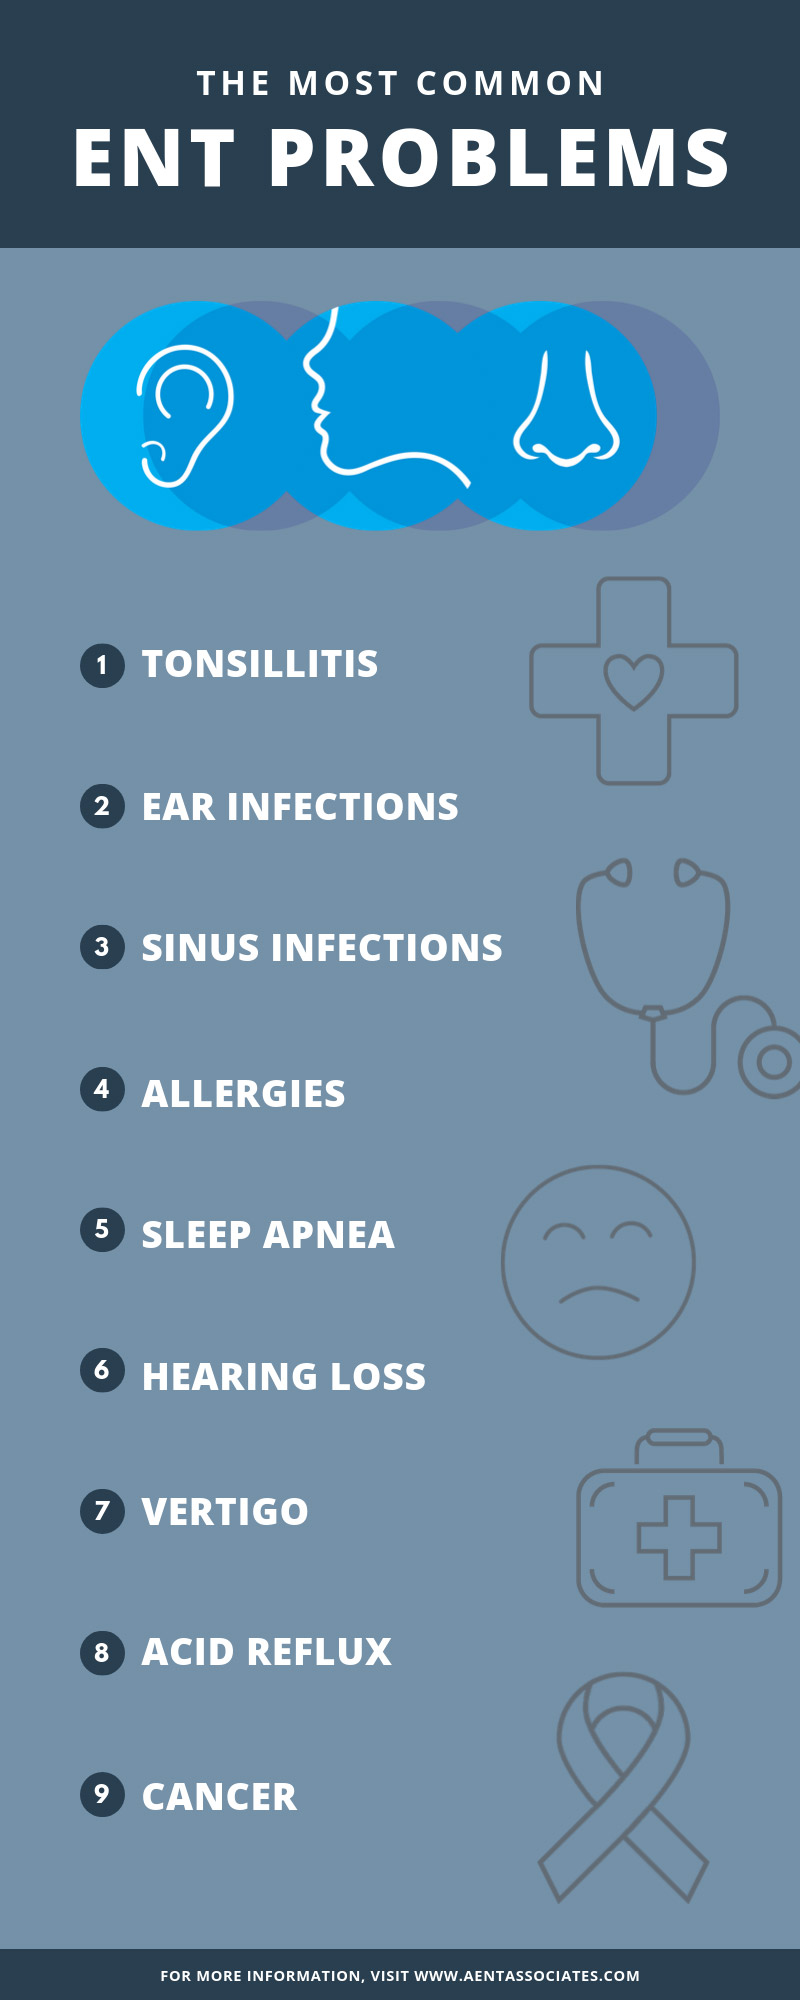 The Most Common ENT Problems infographic